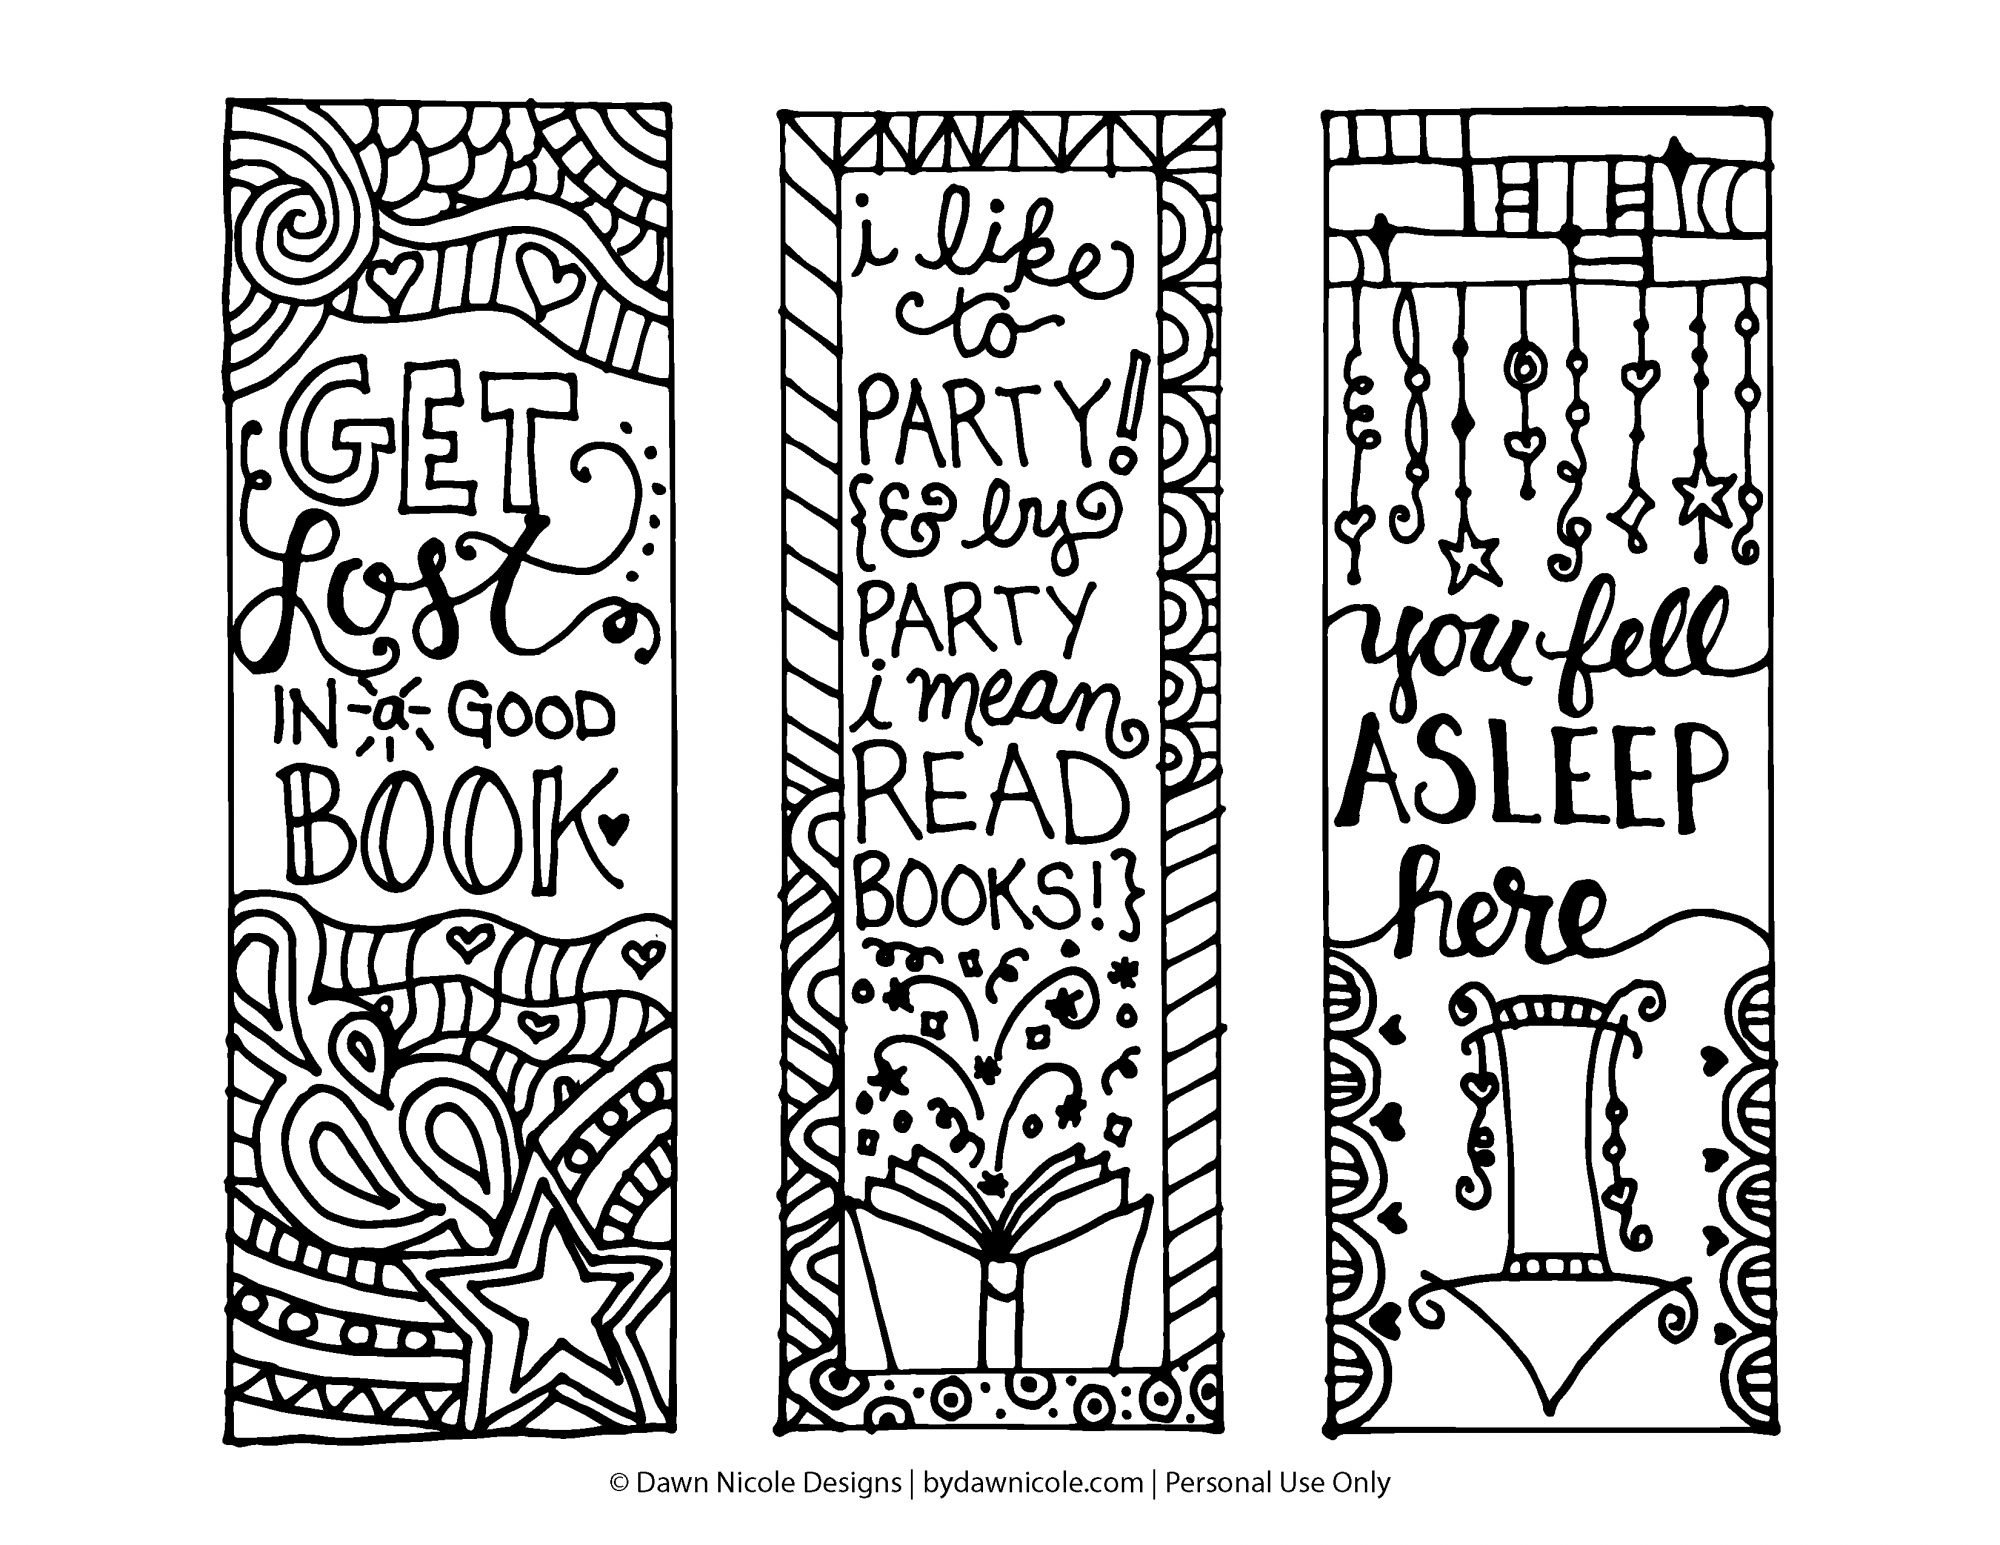 023 Printable Animal Bookmarks Classicoldsong Me To Make And Print - Free Printable Bookmarks Templates